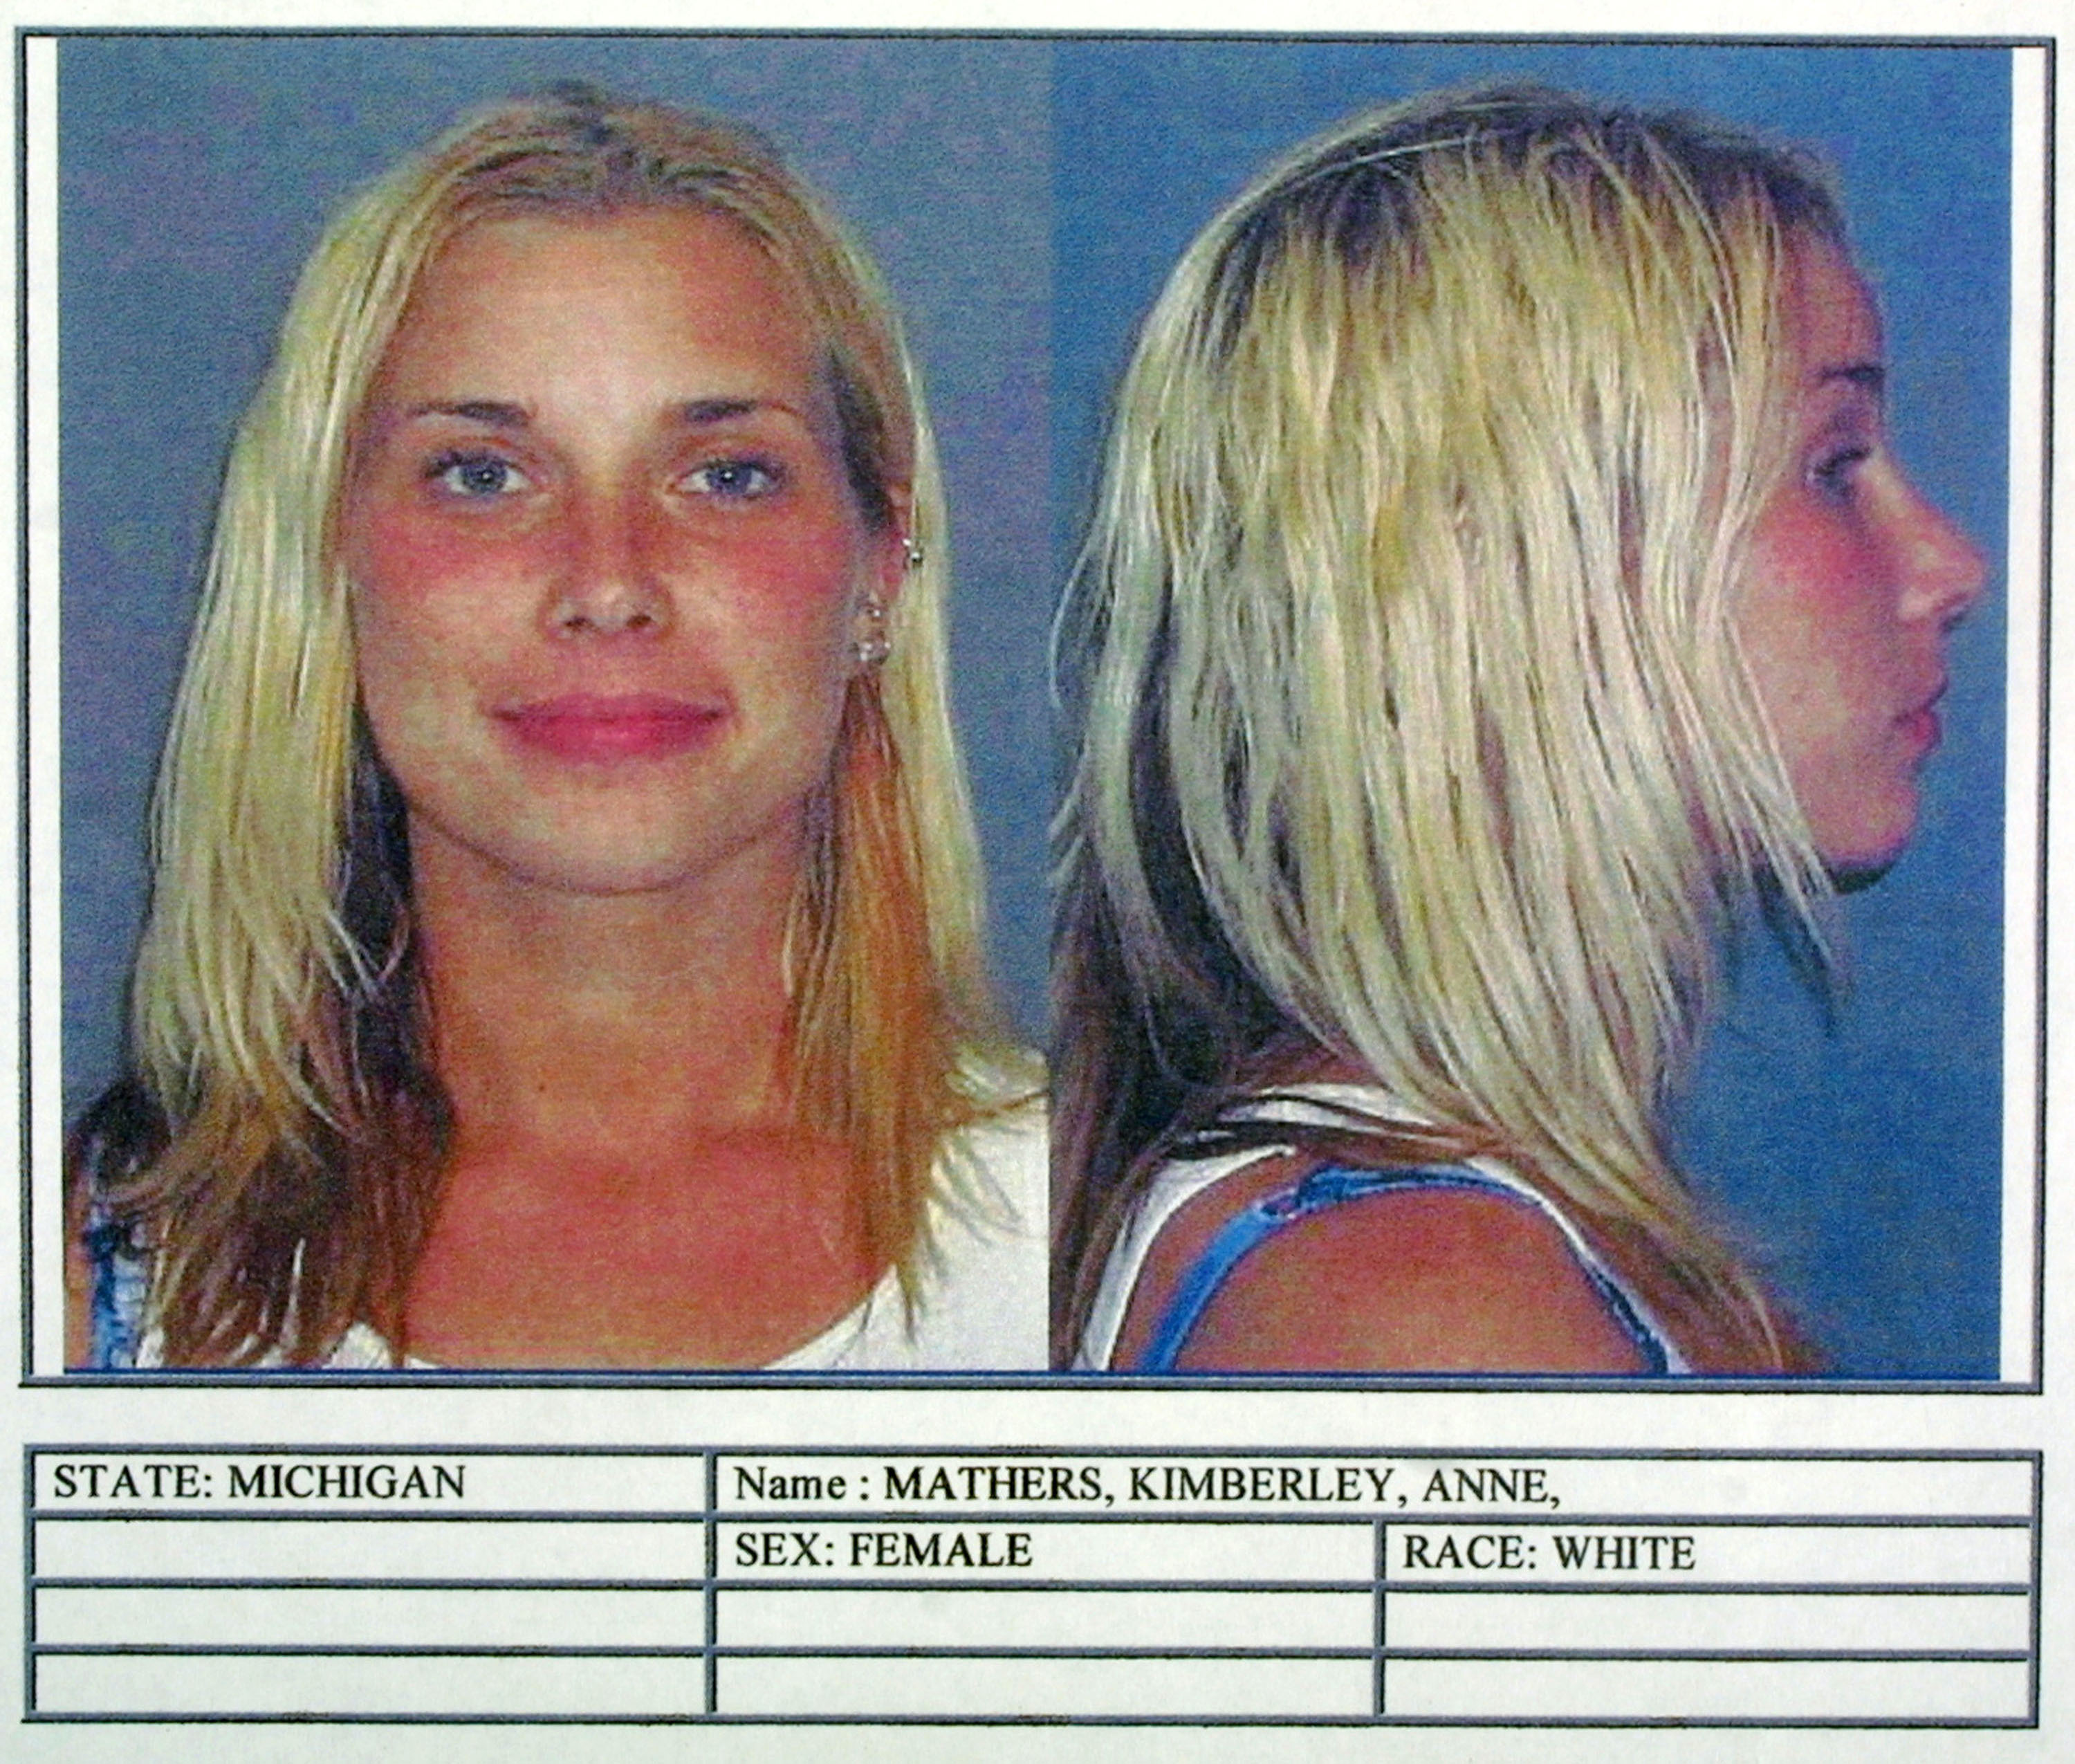 Kim Mathers' mugshot for drug-related charges in St. Clair Shores, Michigan on July 2, 2003 | Source: Getty Images